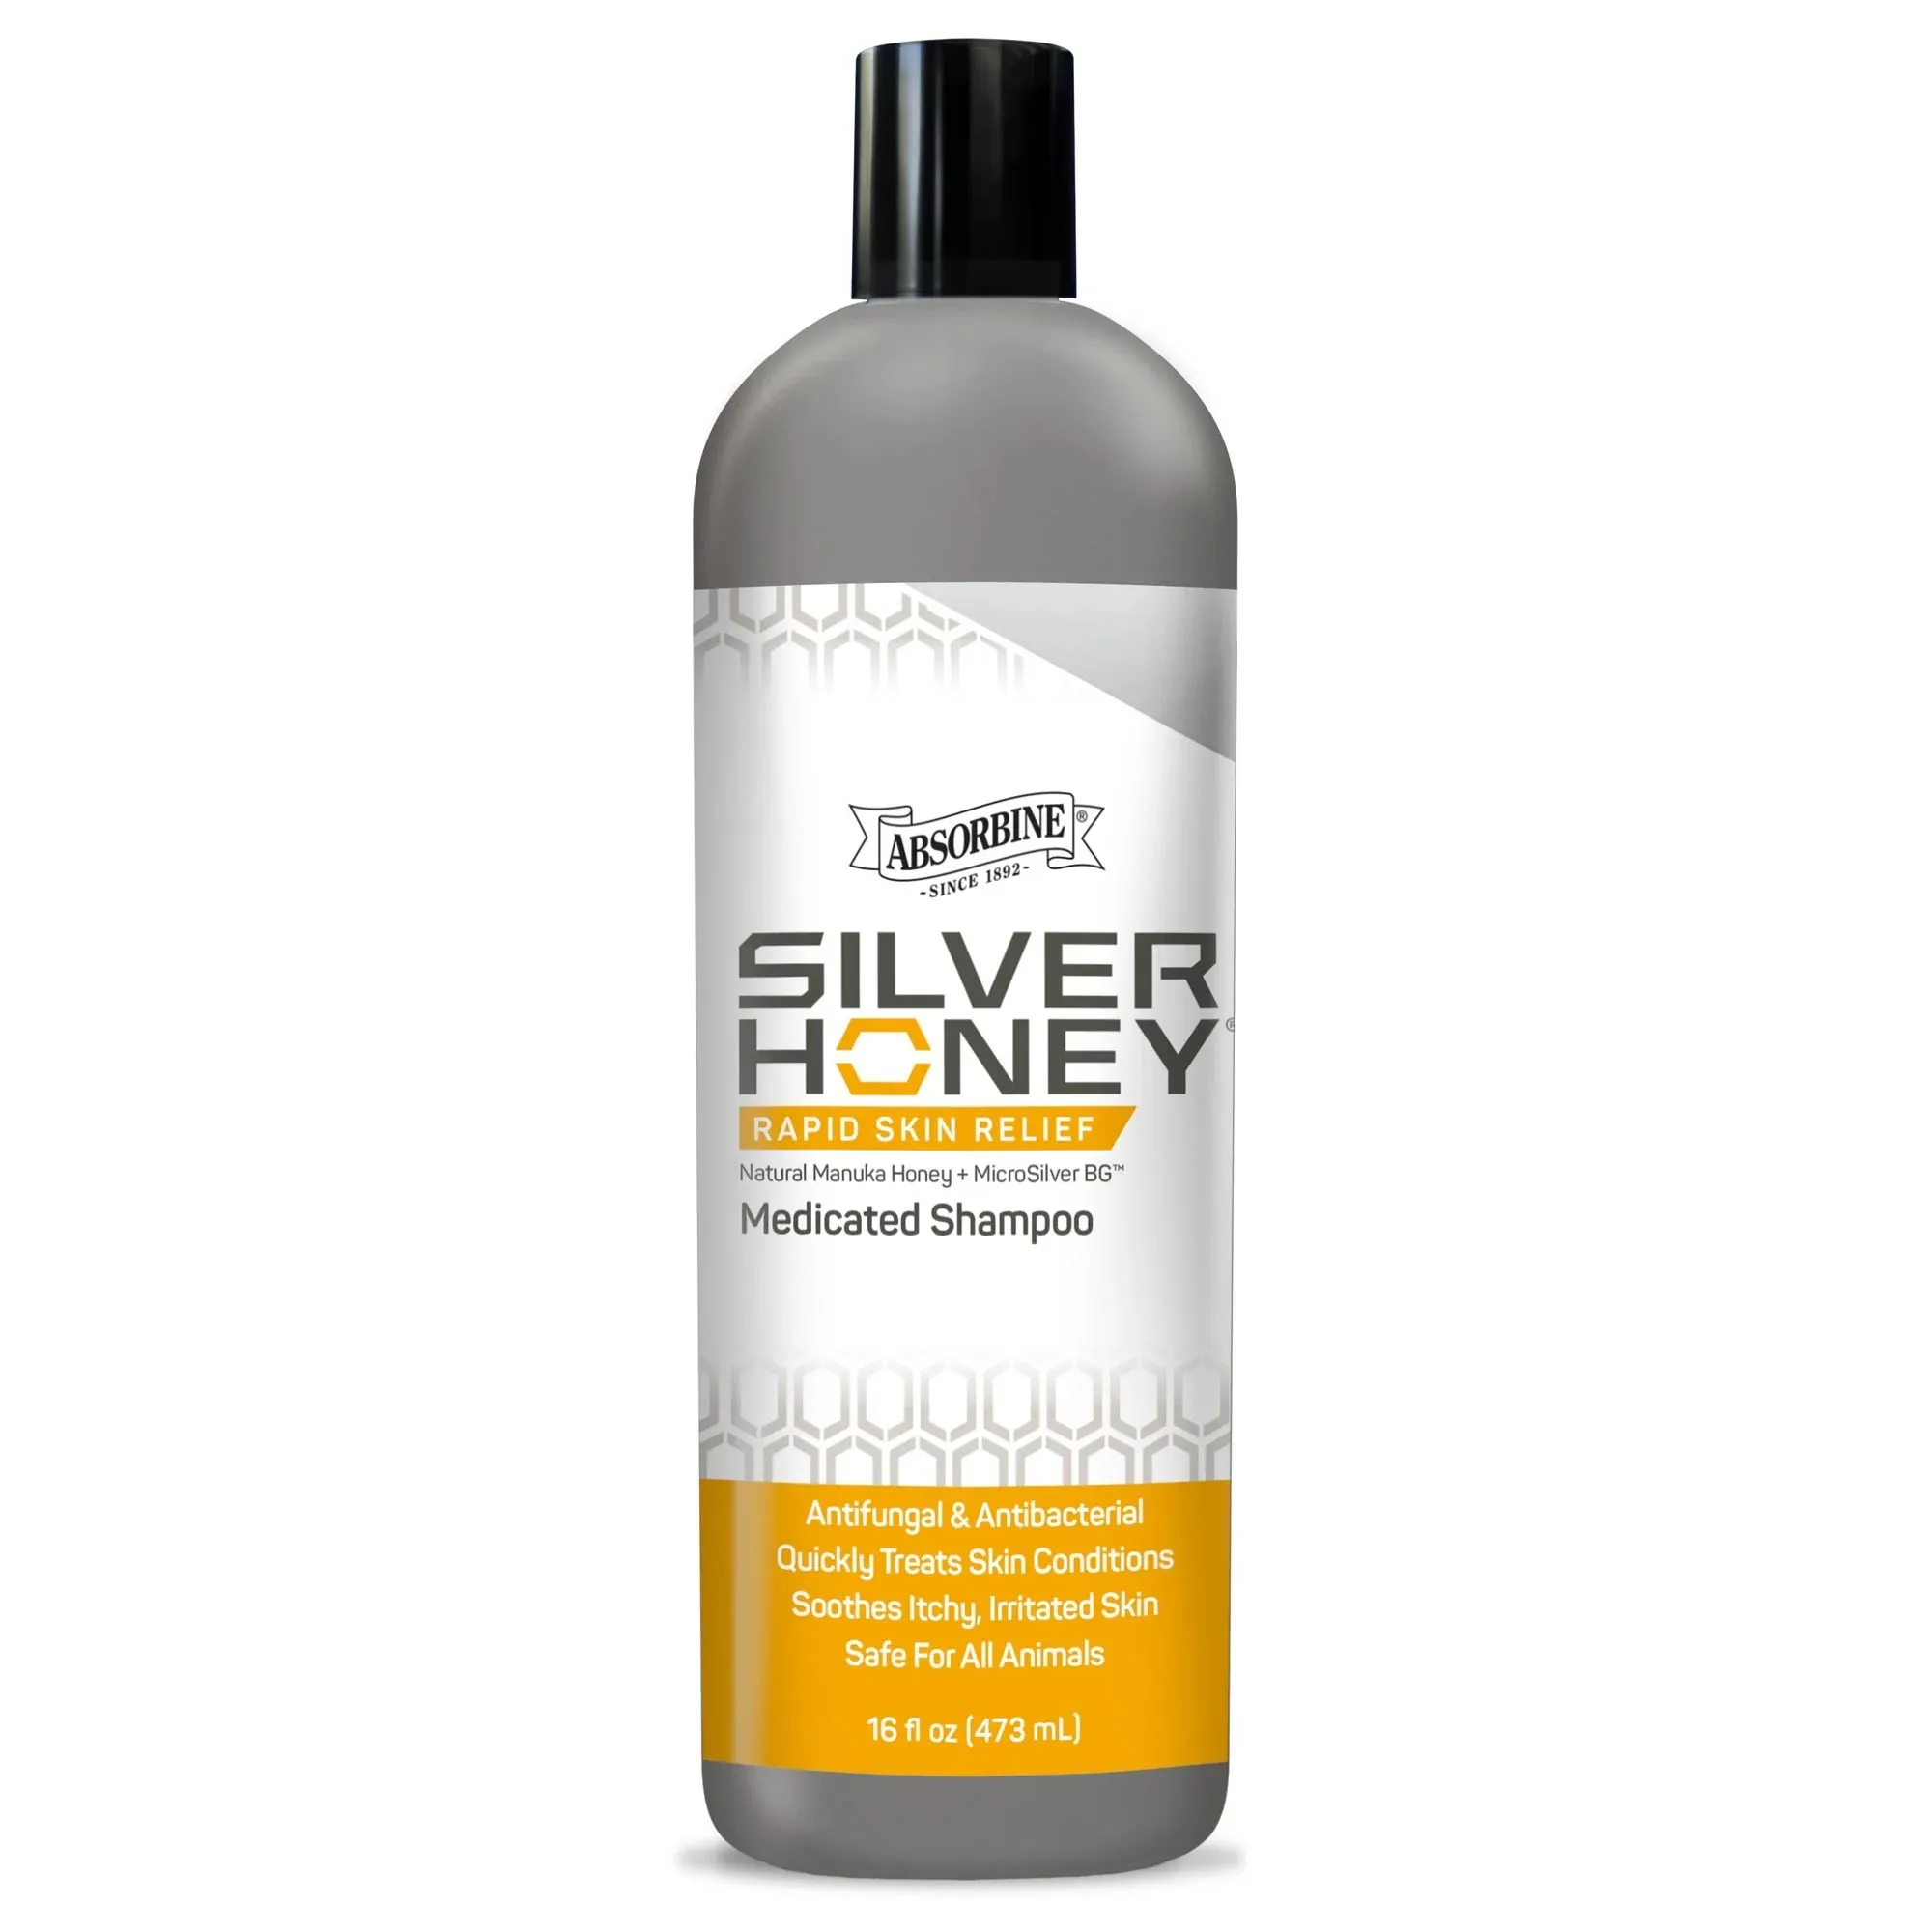 SILVER HONEY RAPID SKIN RELIEF MEDICATED SHAMPOO A